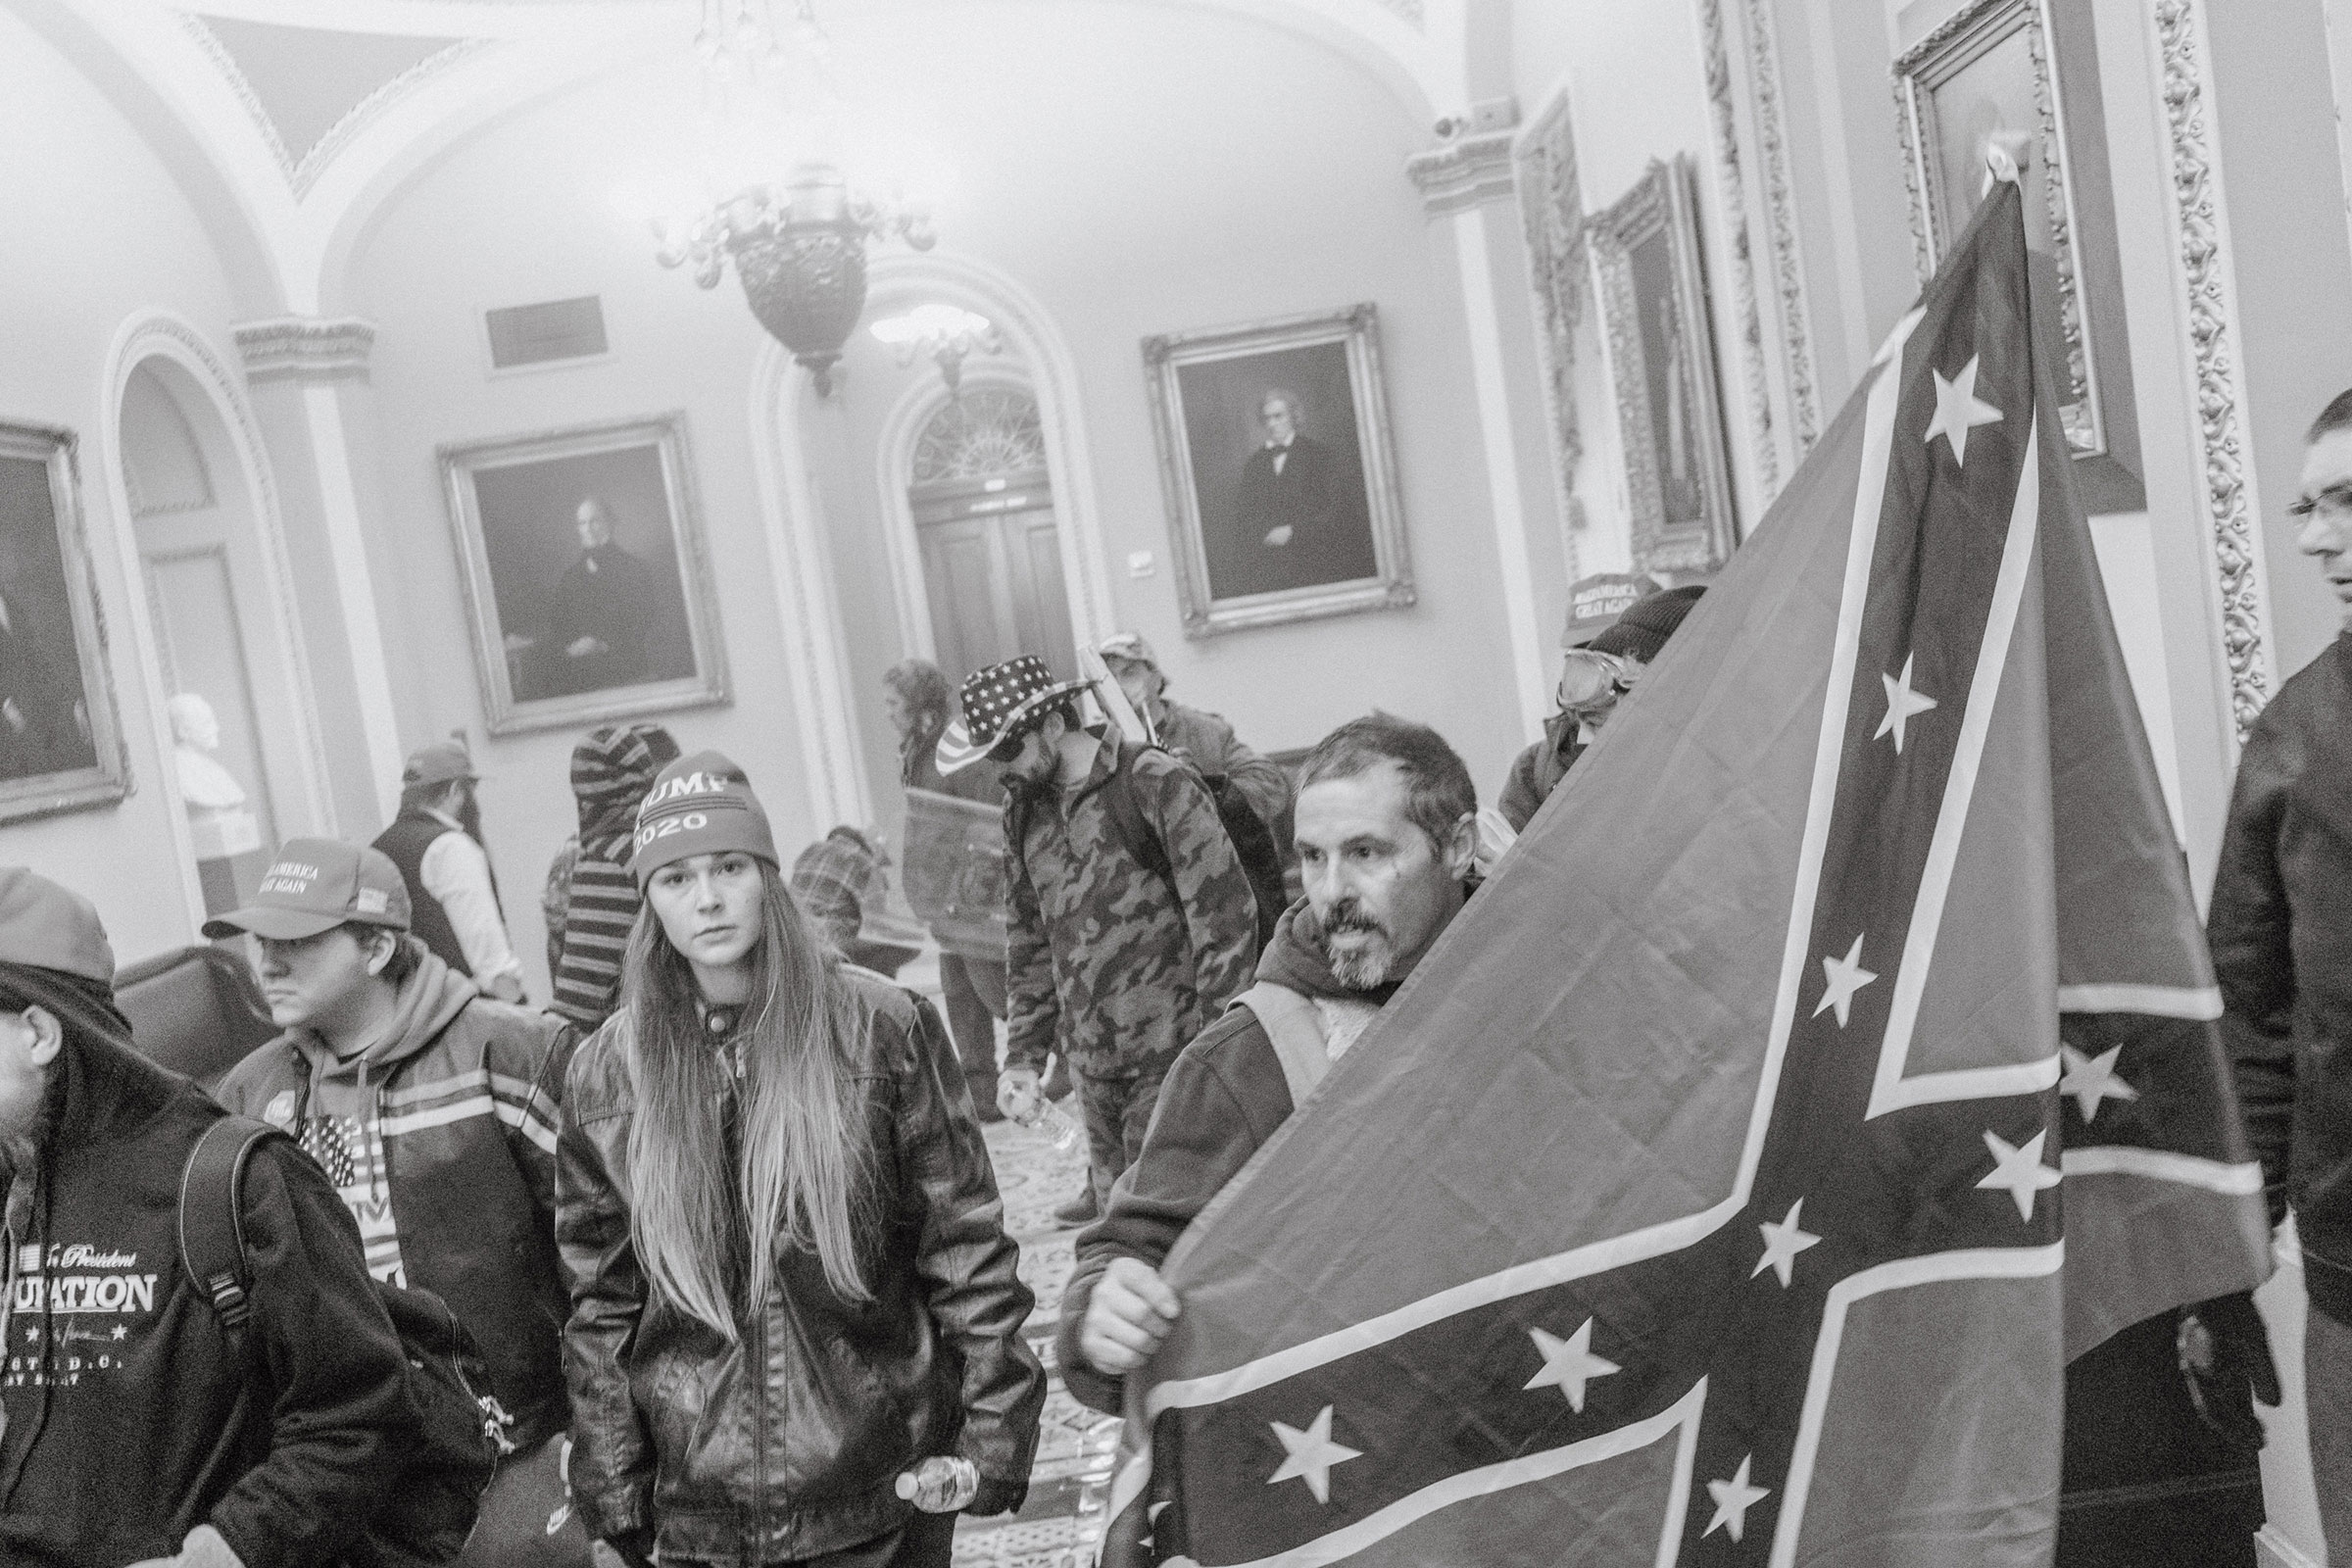 Pro-Trump rioters seen inside the Capitol on Jan. 6. (Christopher Lee for TIME)